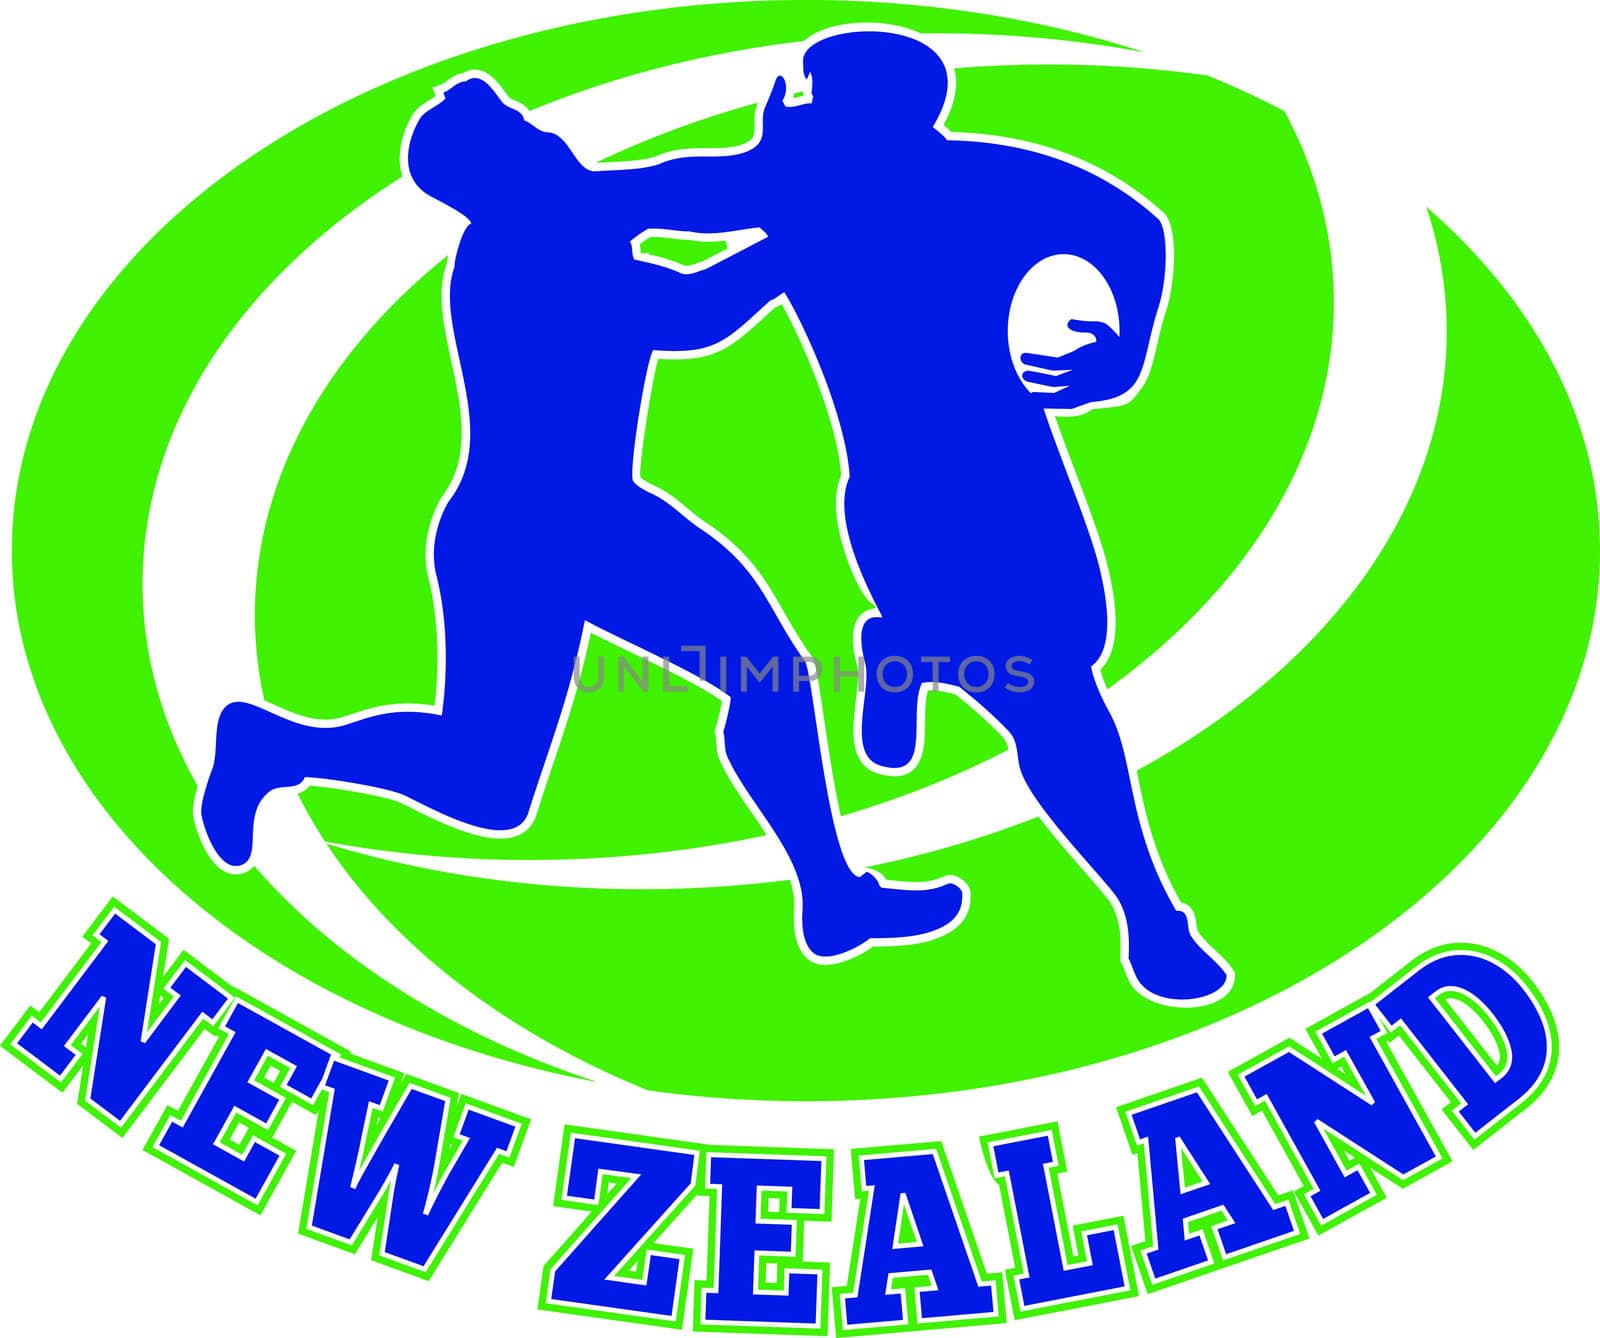 illustration of a Rugby player running fending off tackle with ball shape in background and words "new zealand"